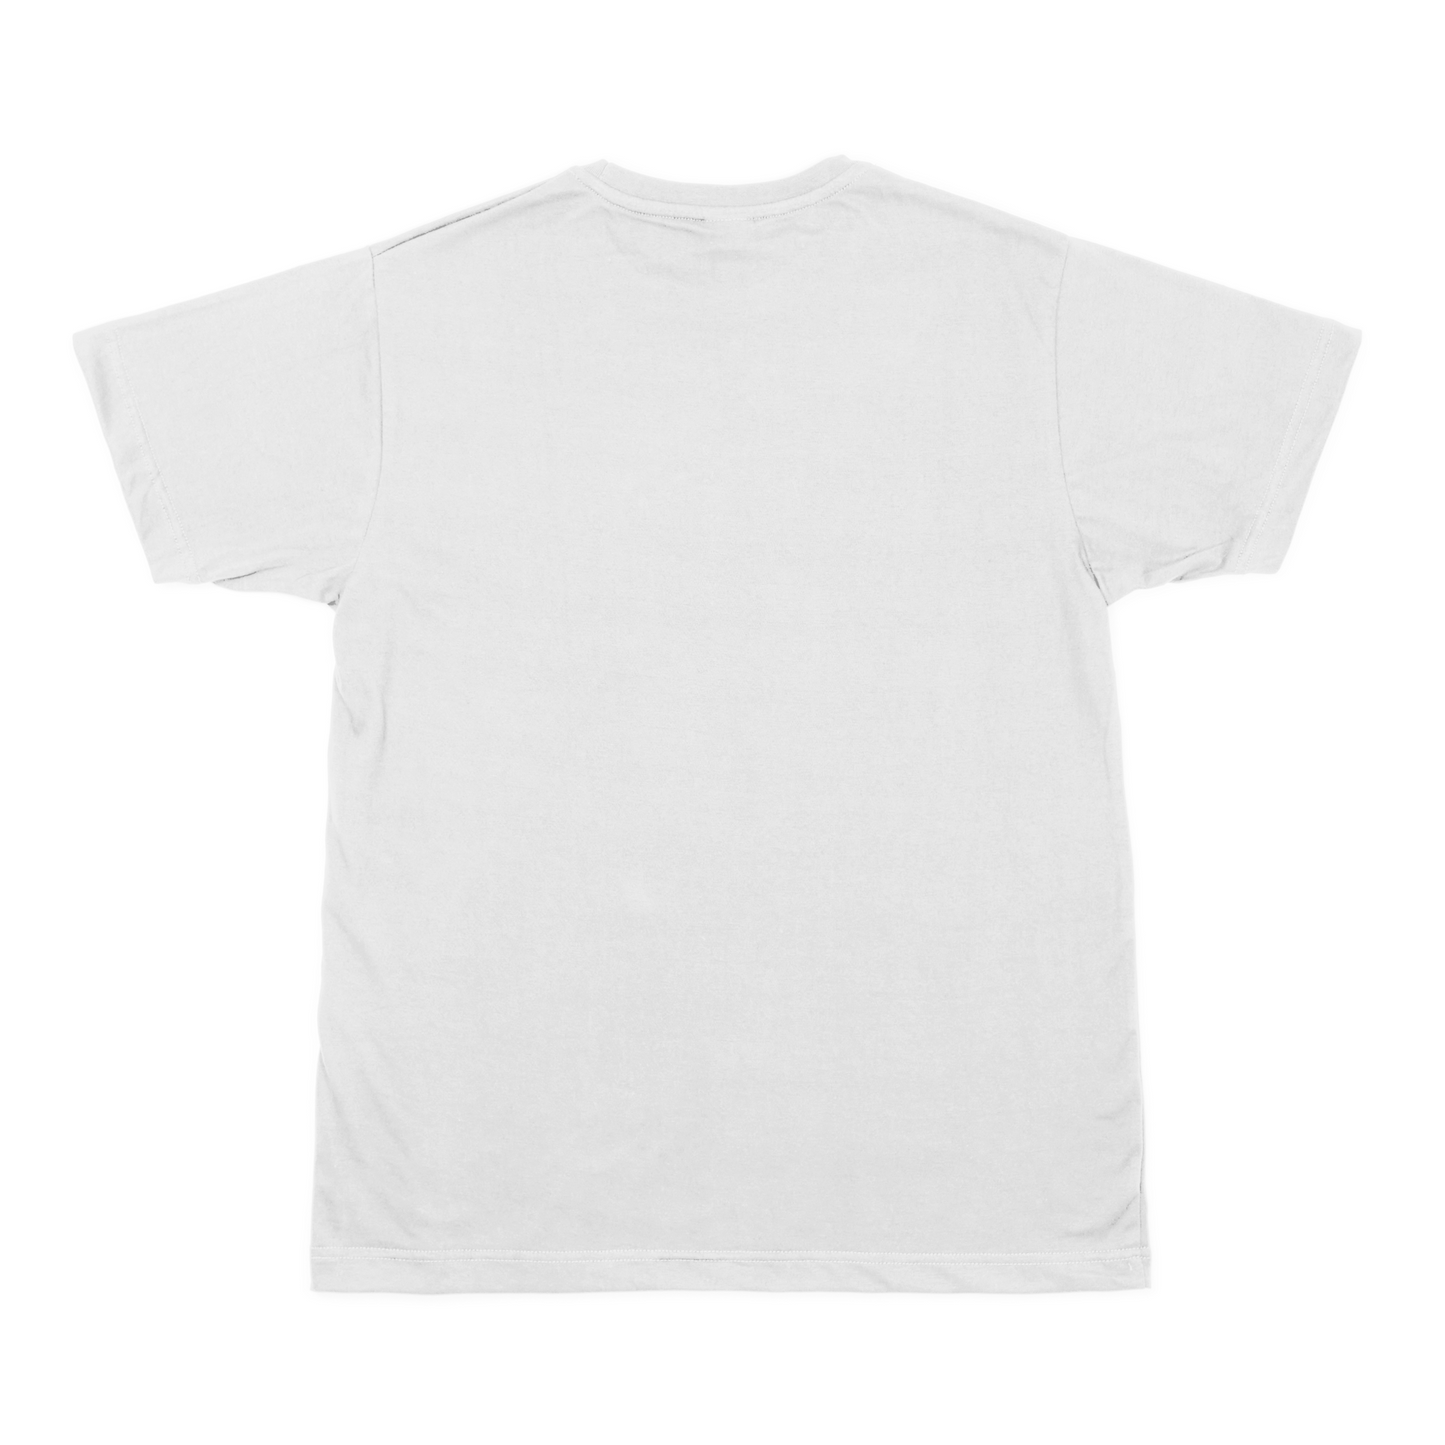 Relaxed Fit Hemp Tee - White